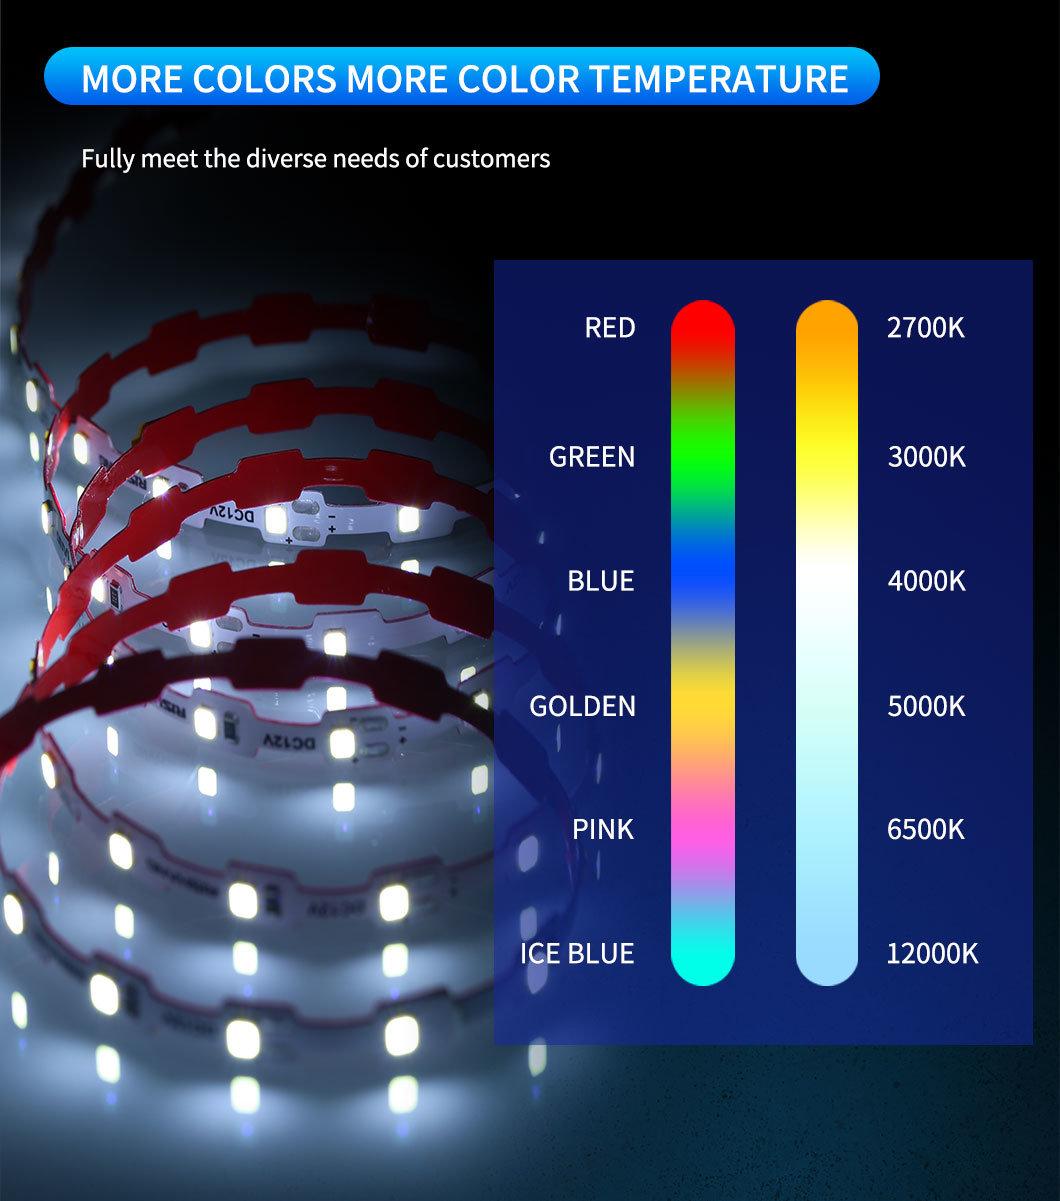 High Brightness Three LEDs Per Cutting Mark More Stable Quality 3D Flexible LED Strips